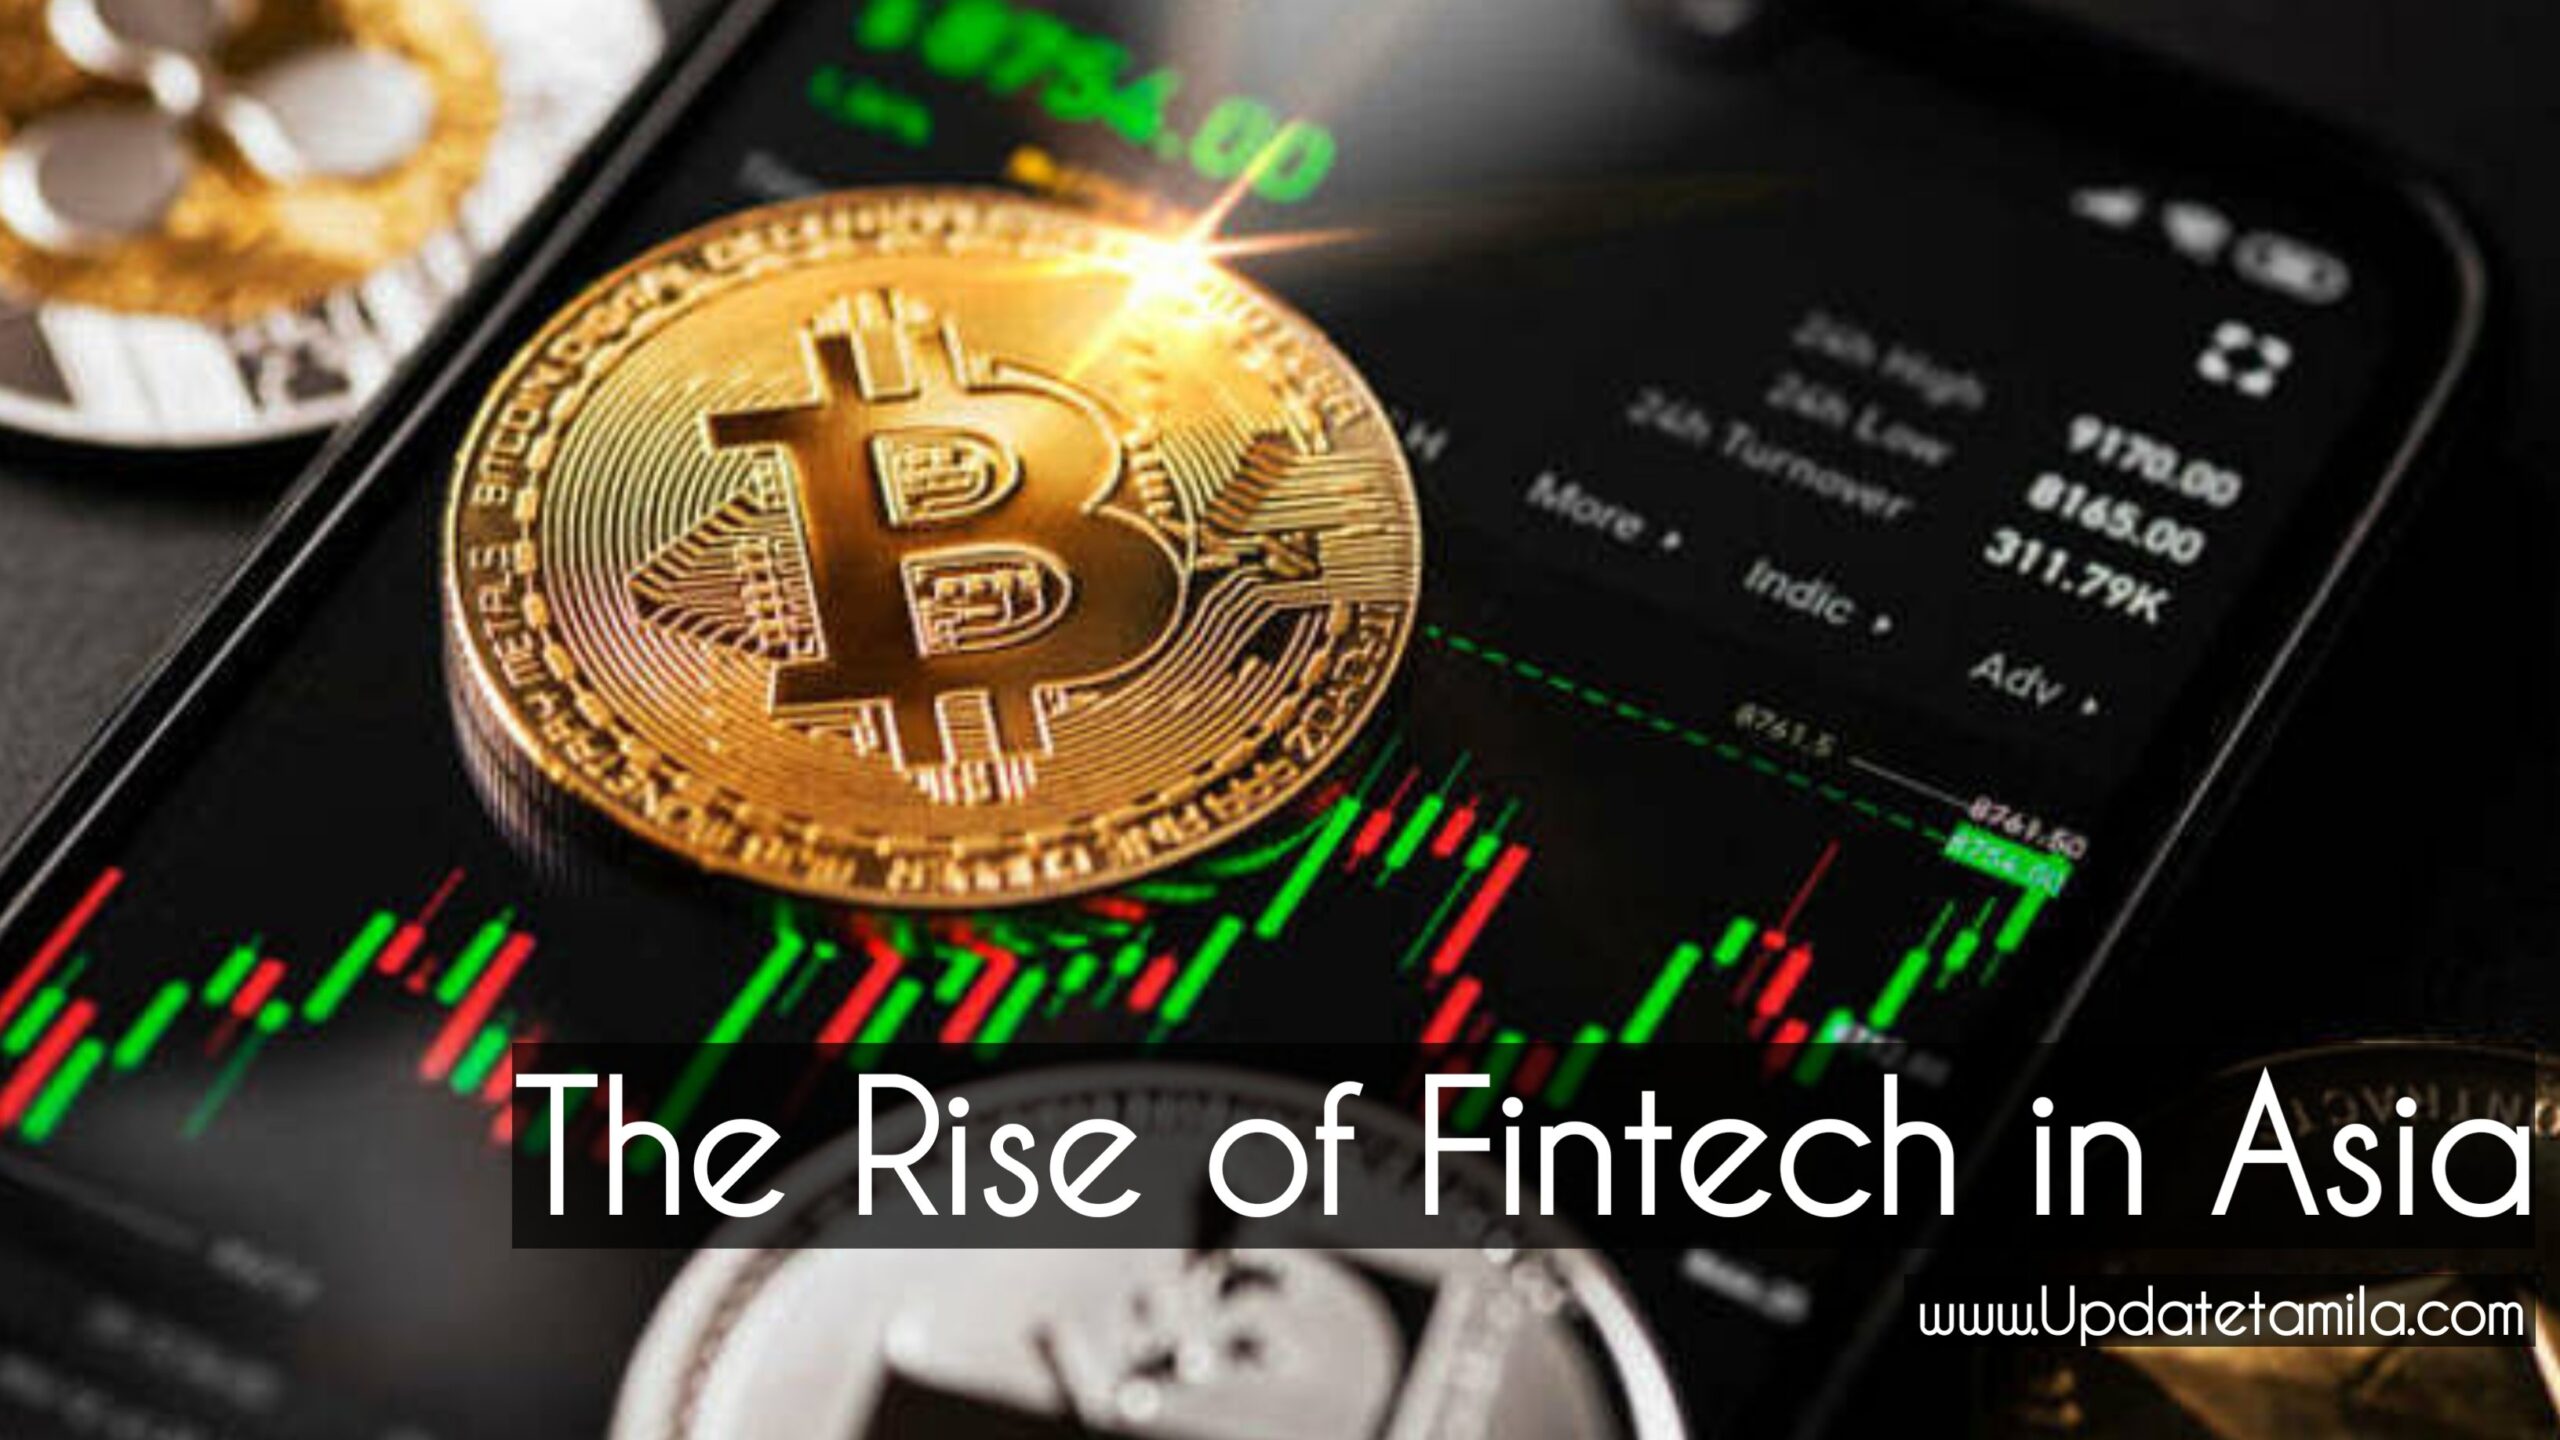 "Unleashing the Power of Fintechasianet crypto facto : Cryptocurrency Revolution in Asia"